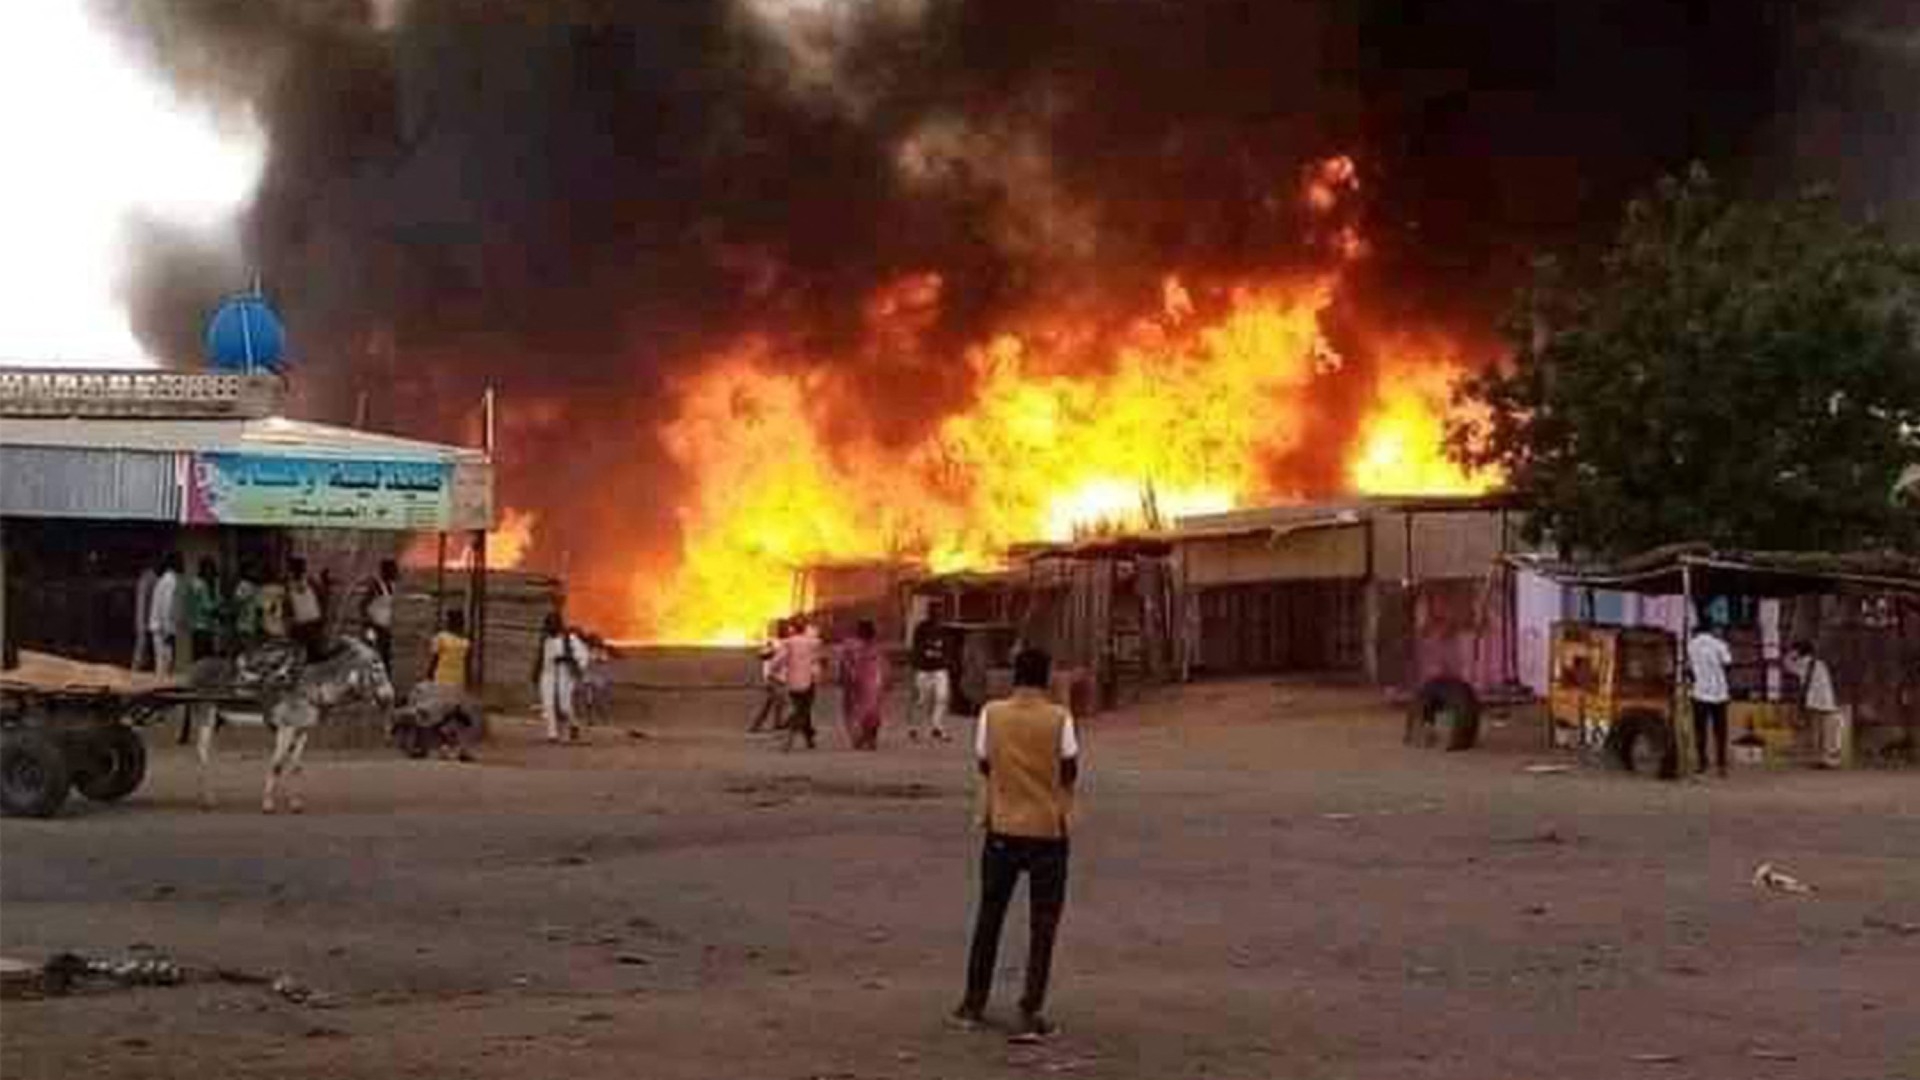 A man stands by as a fire rages in a livestock market area in al-Fasher, the capital of Sudan's North Darfur state, on 1 September (AFP)